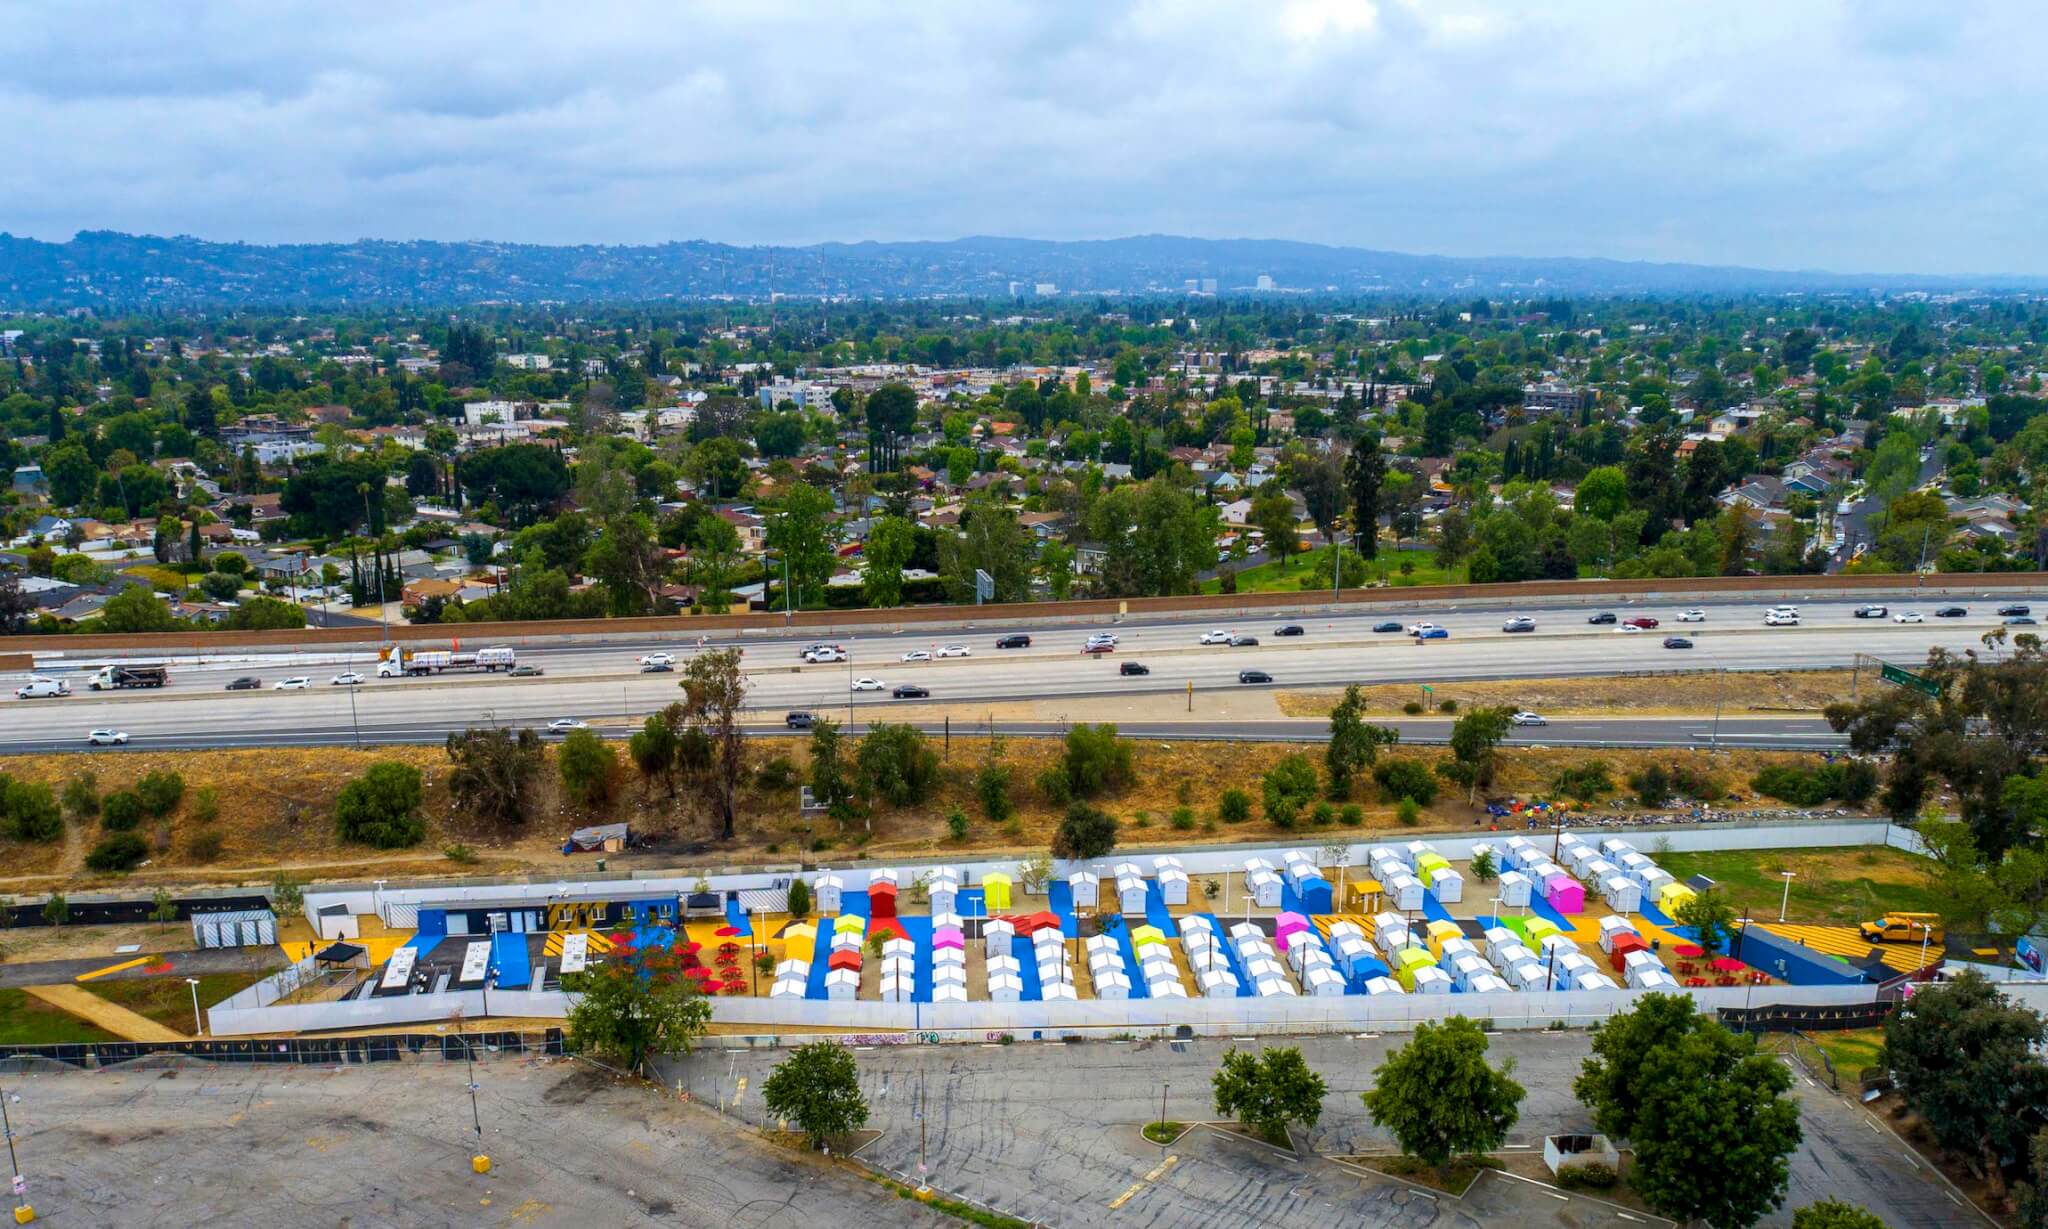 overhead view of a tiny house village next to a freeway in L.A.